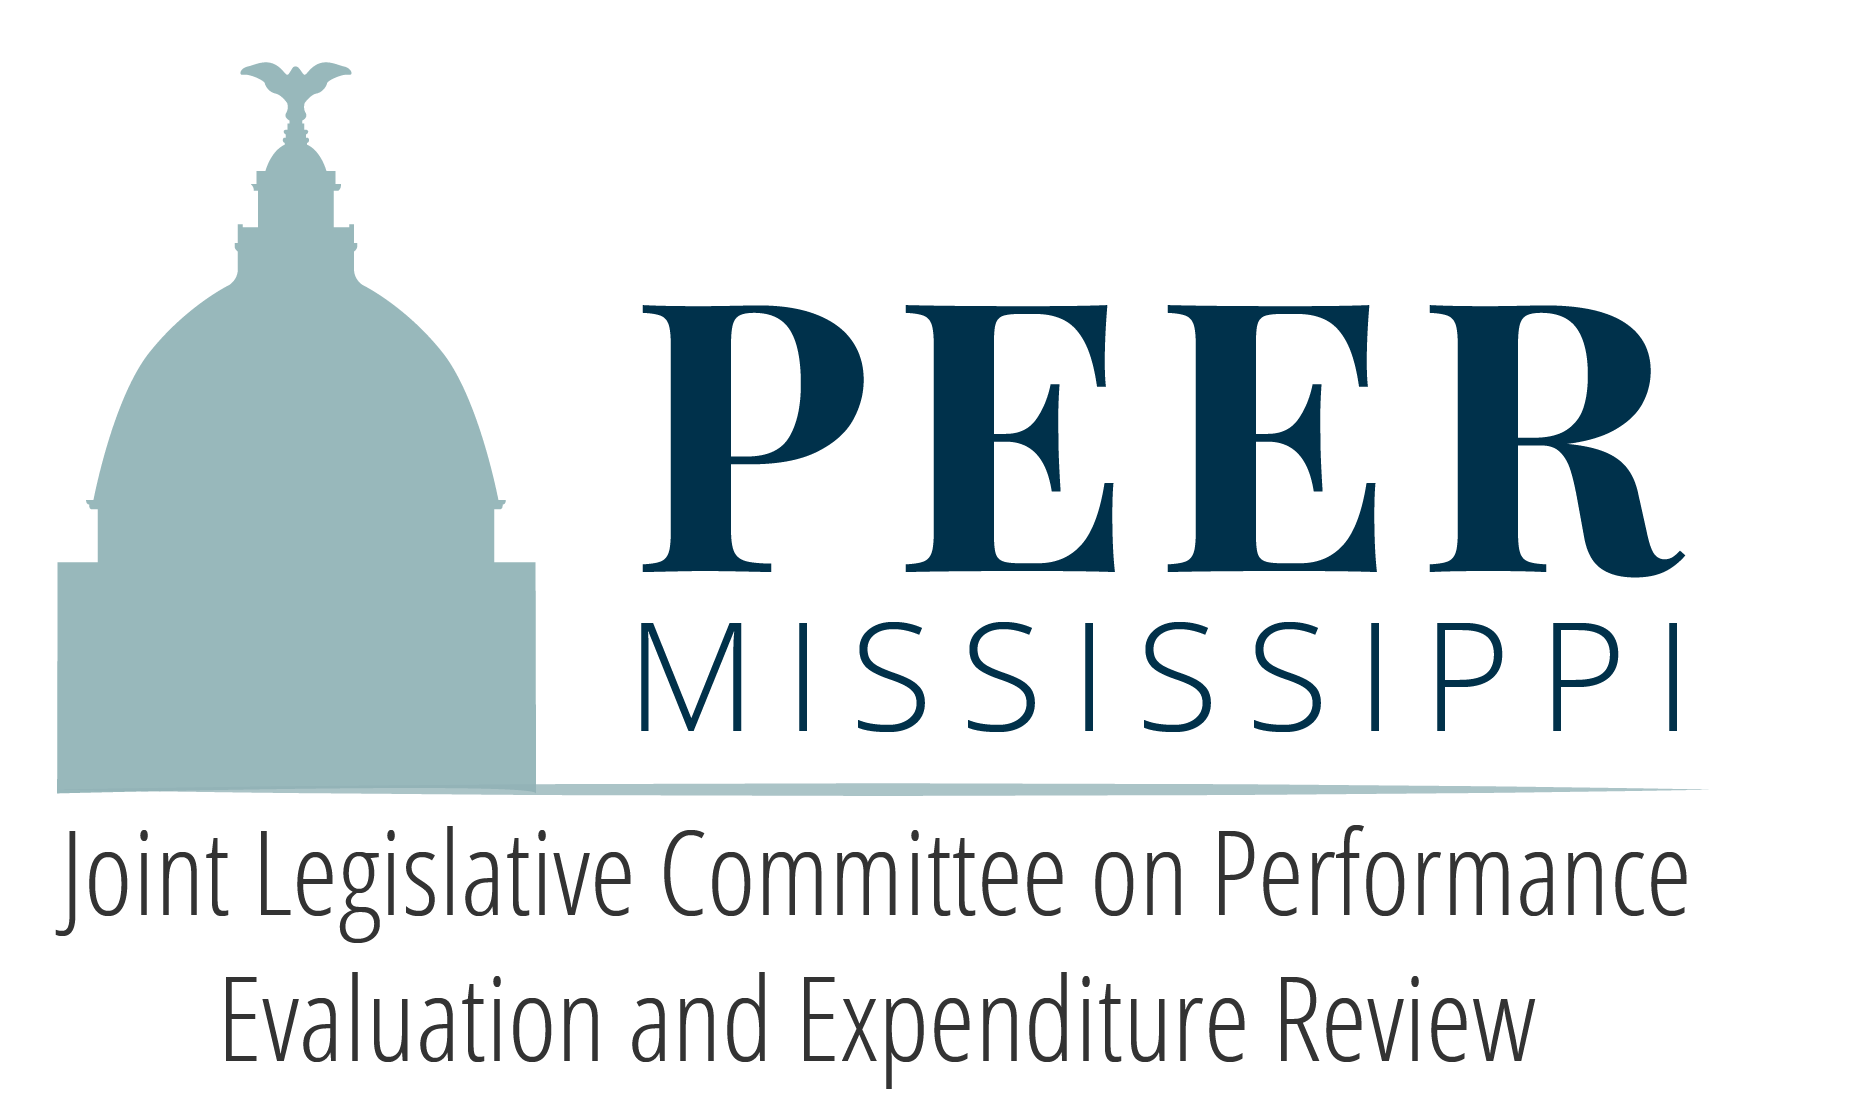 Joint Legislative Committee on Performance Evaluation and Expenditure Review